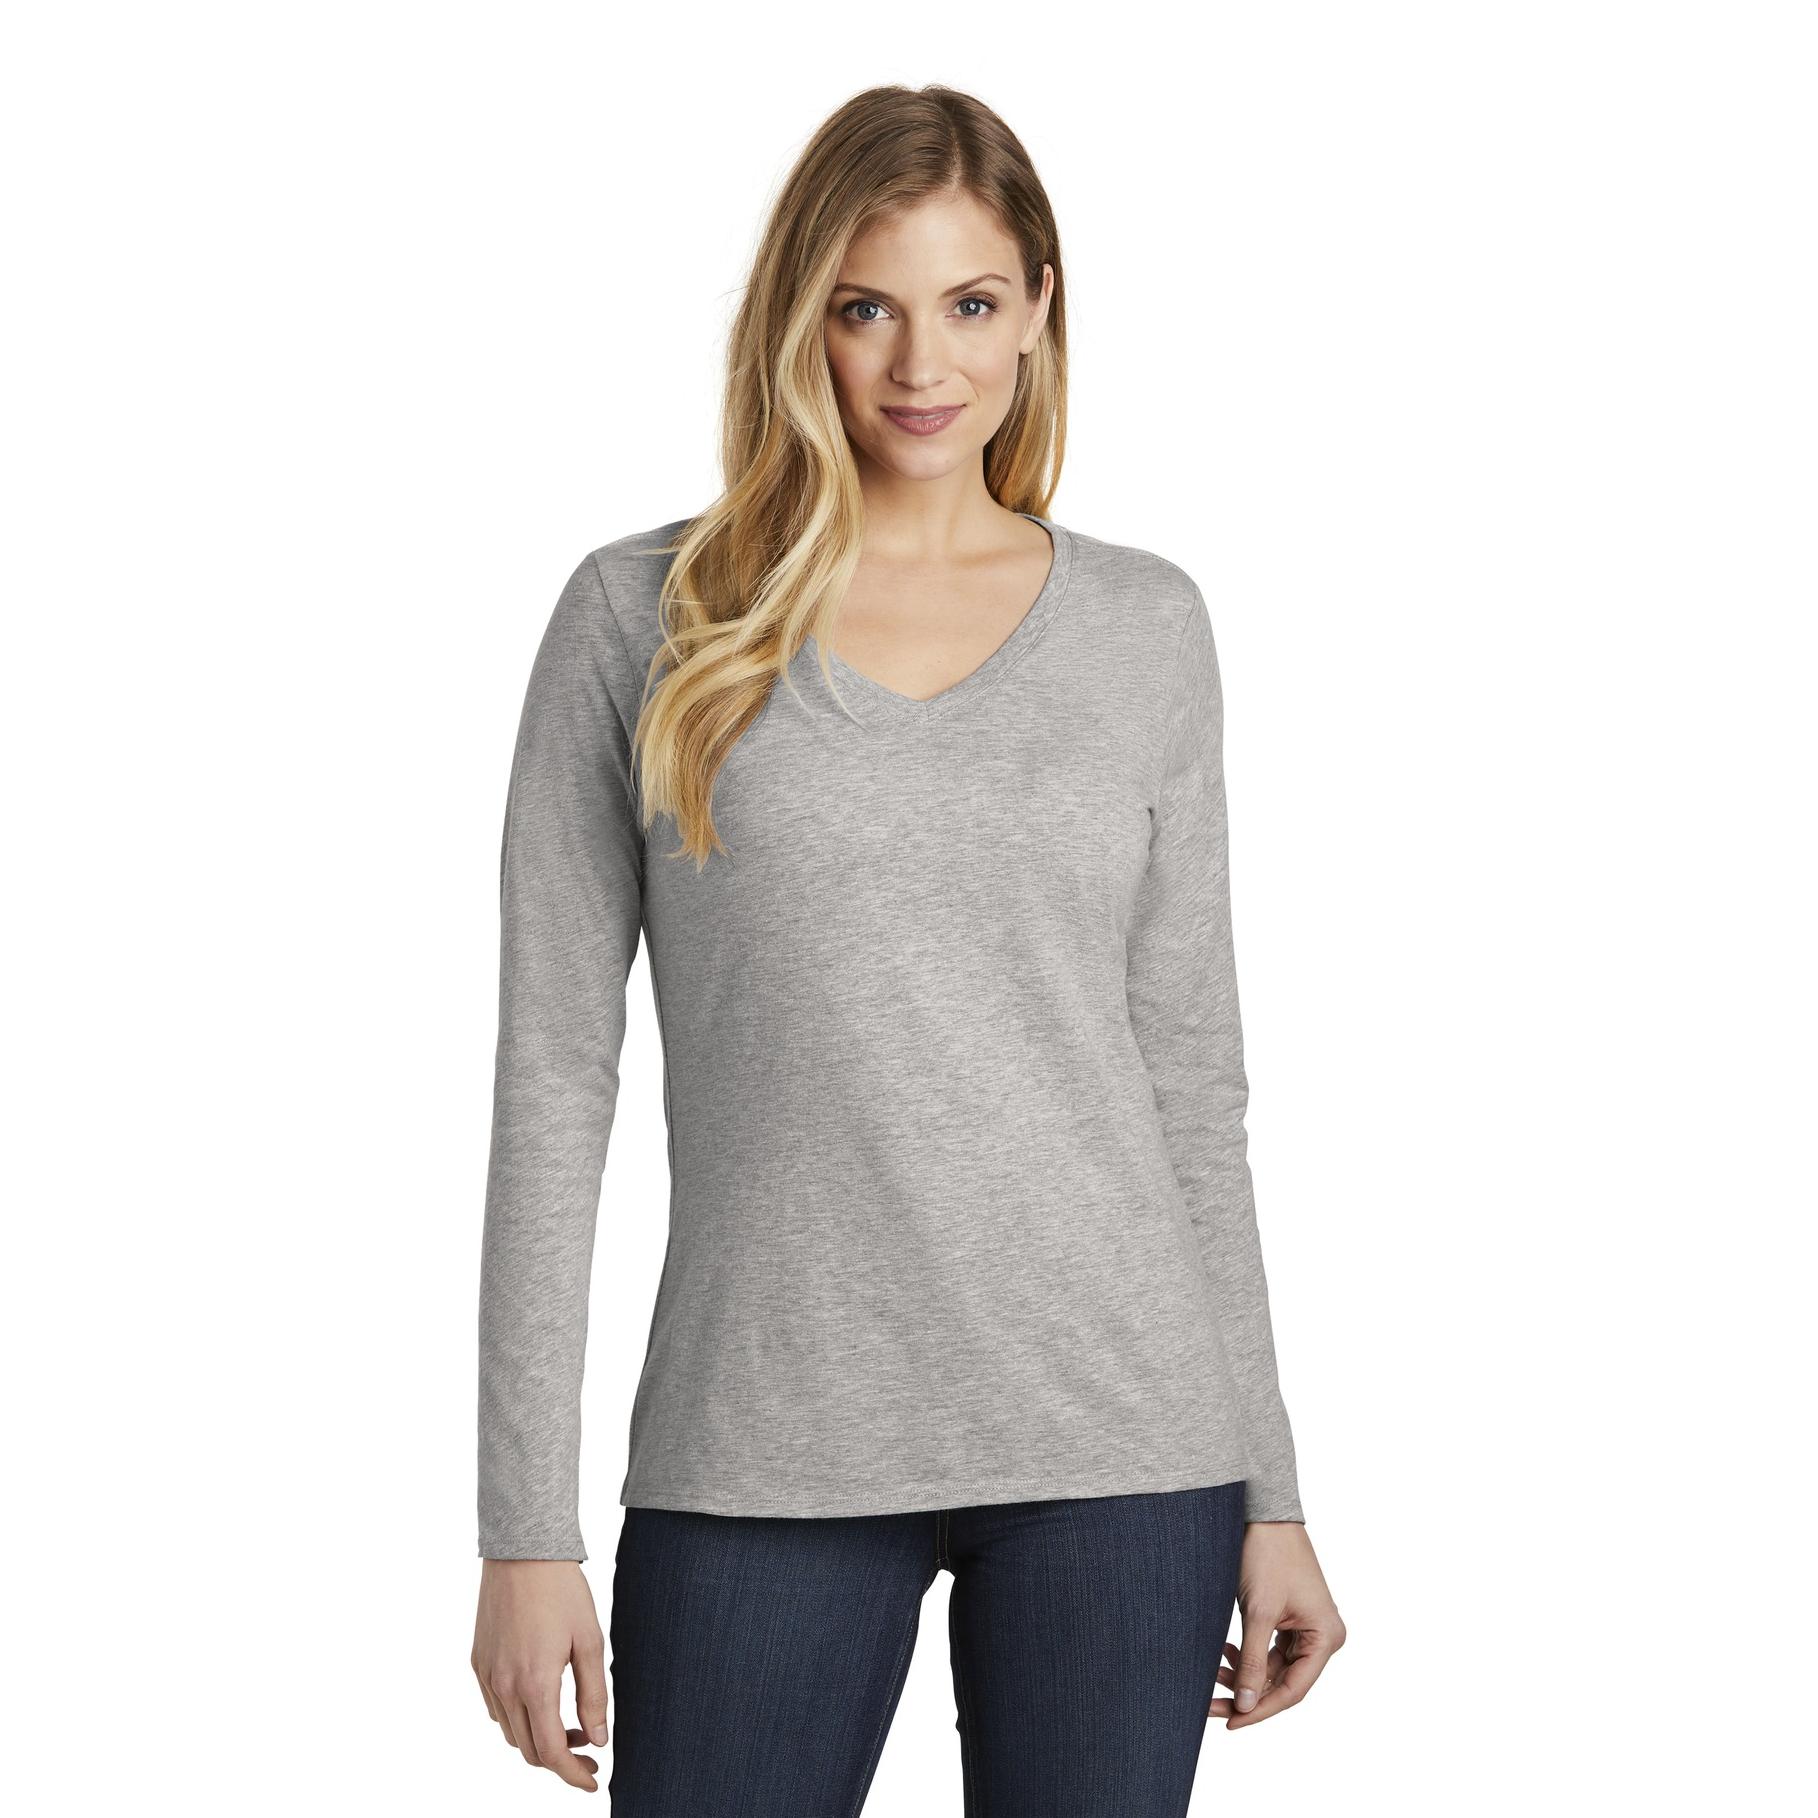 District DT6201 Women's Very Important Tee Long Sleeve - Light Heather ...